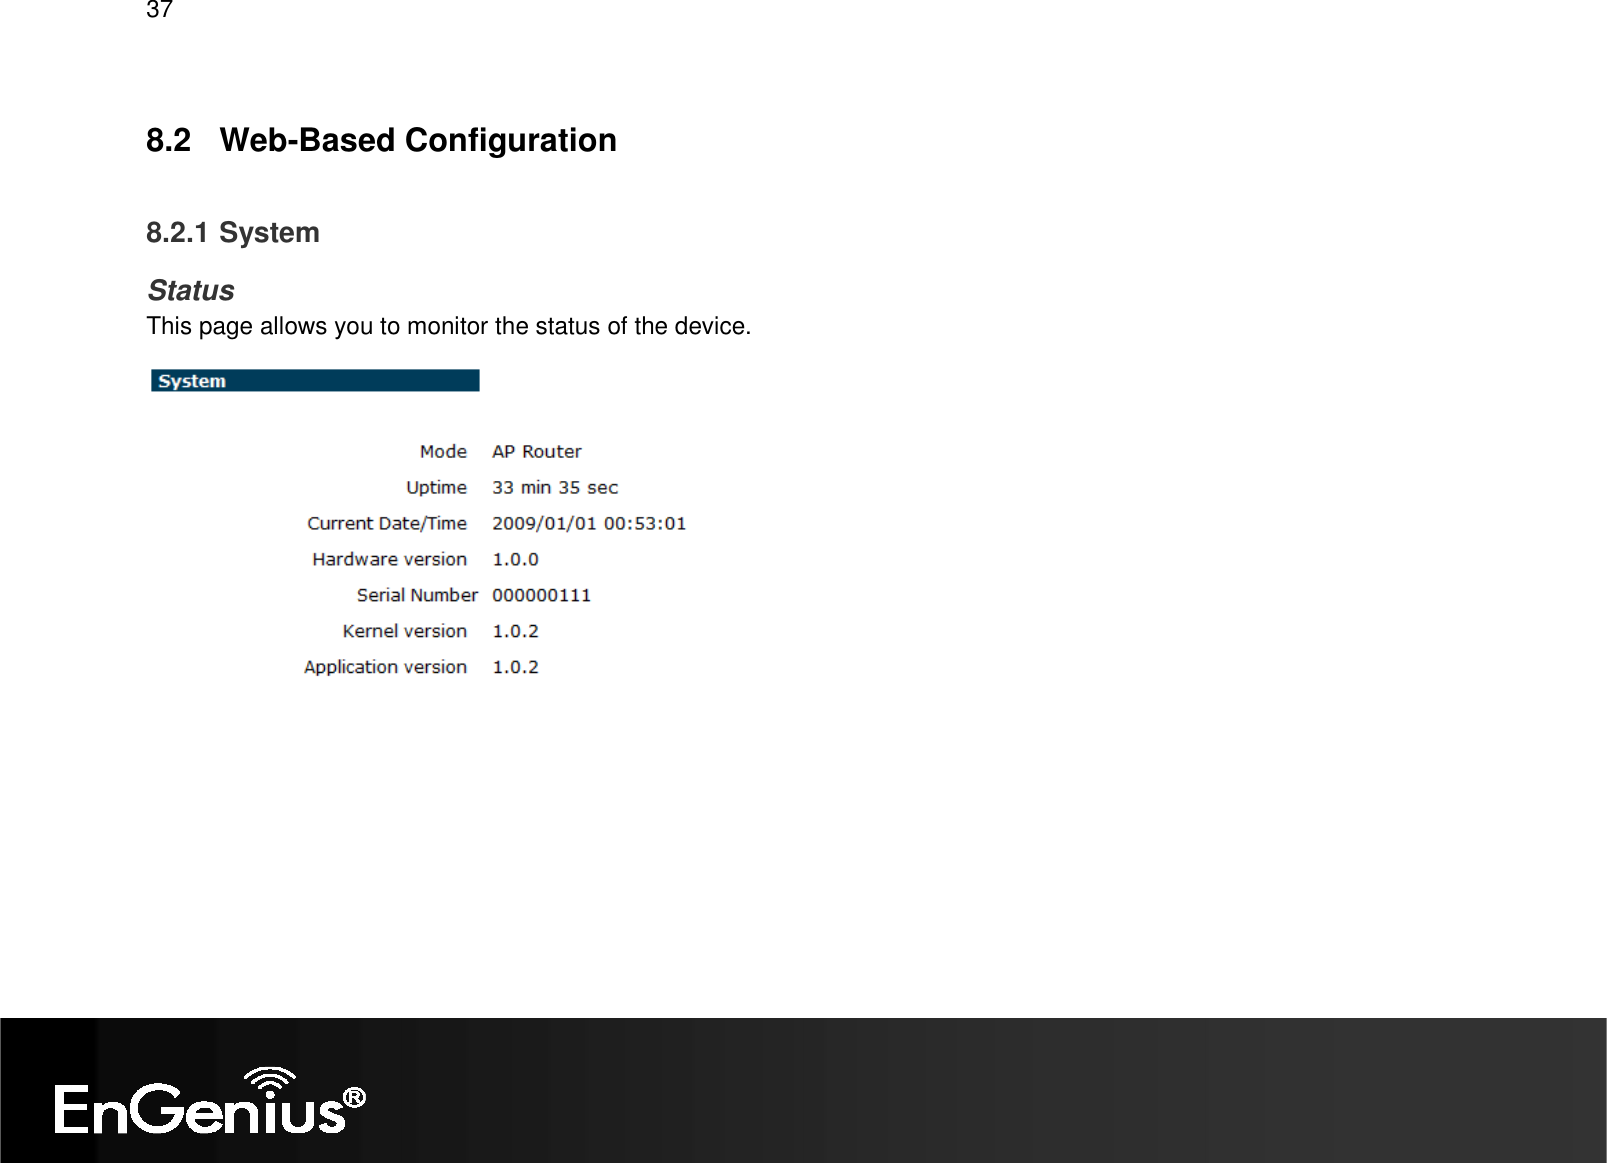   37  8.2  Web-Based Configuration  8.2.1 System Status This page allows you to monitor the status of the device.        